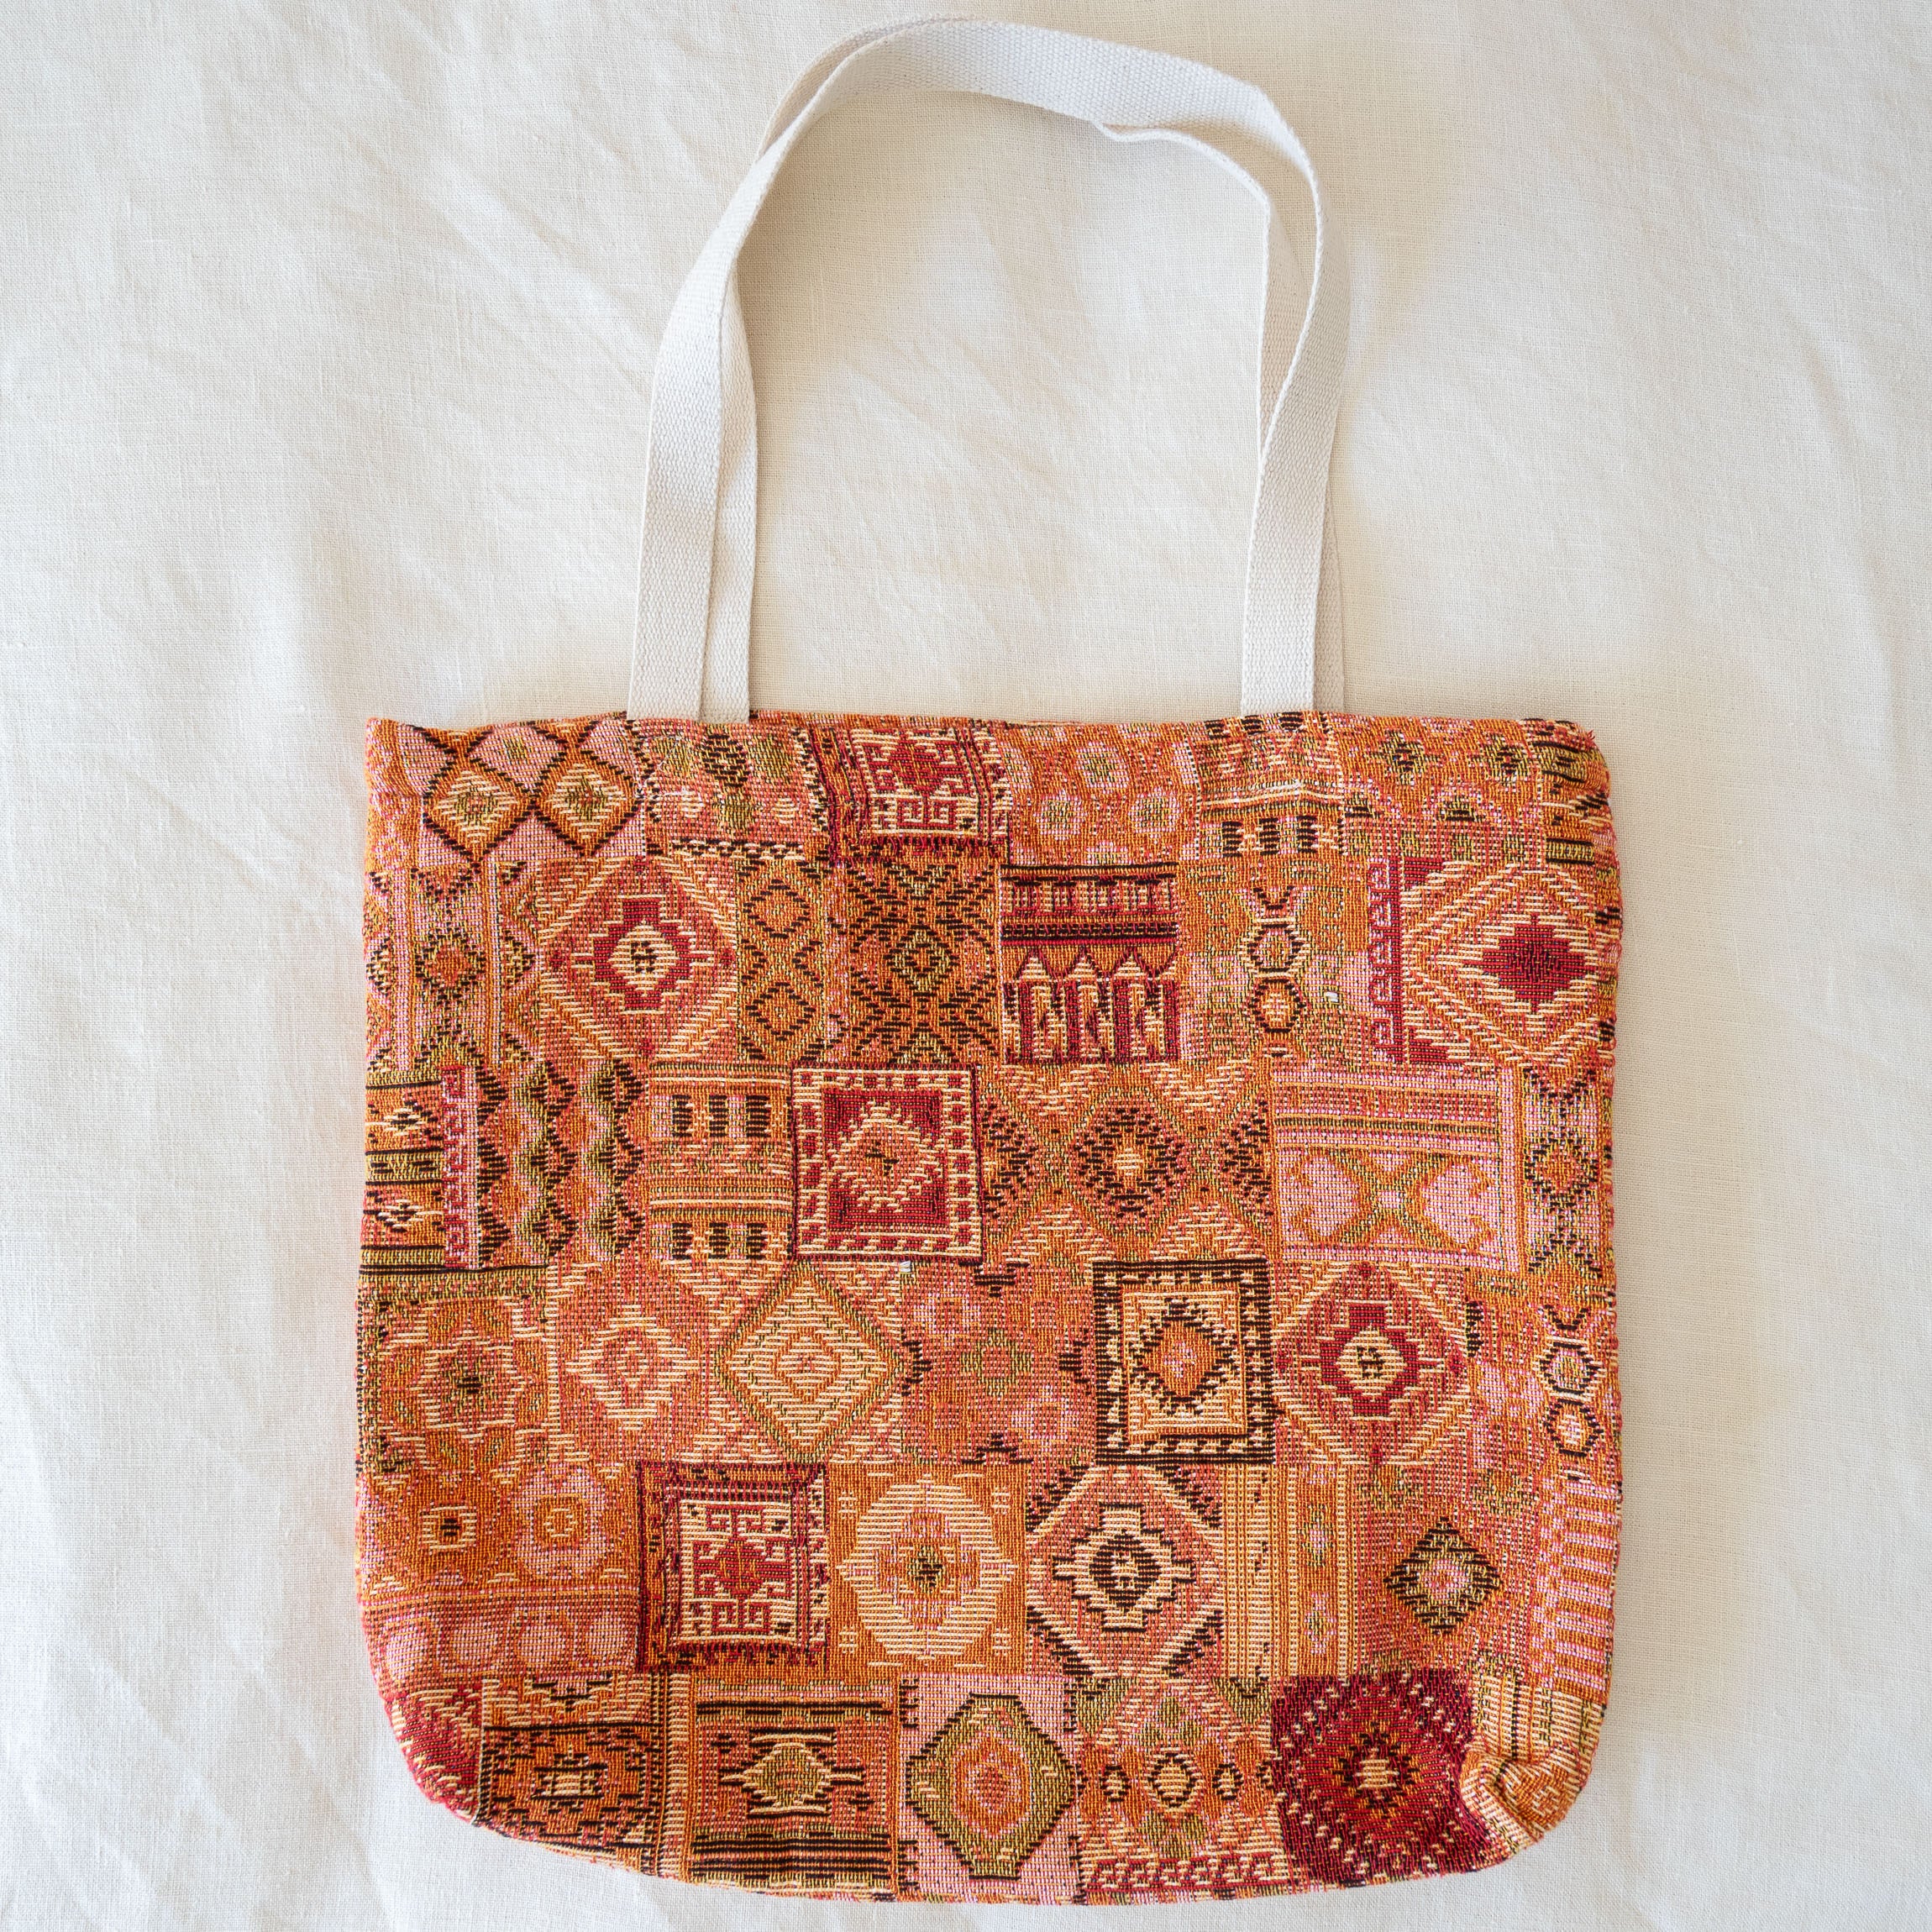 The Patchwork Bag